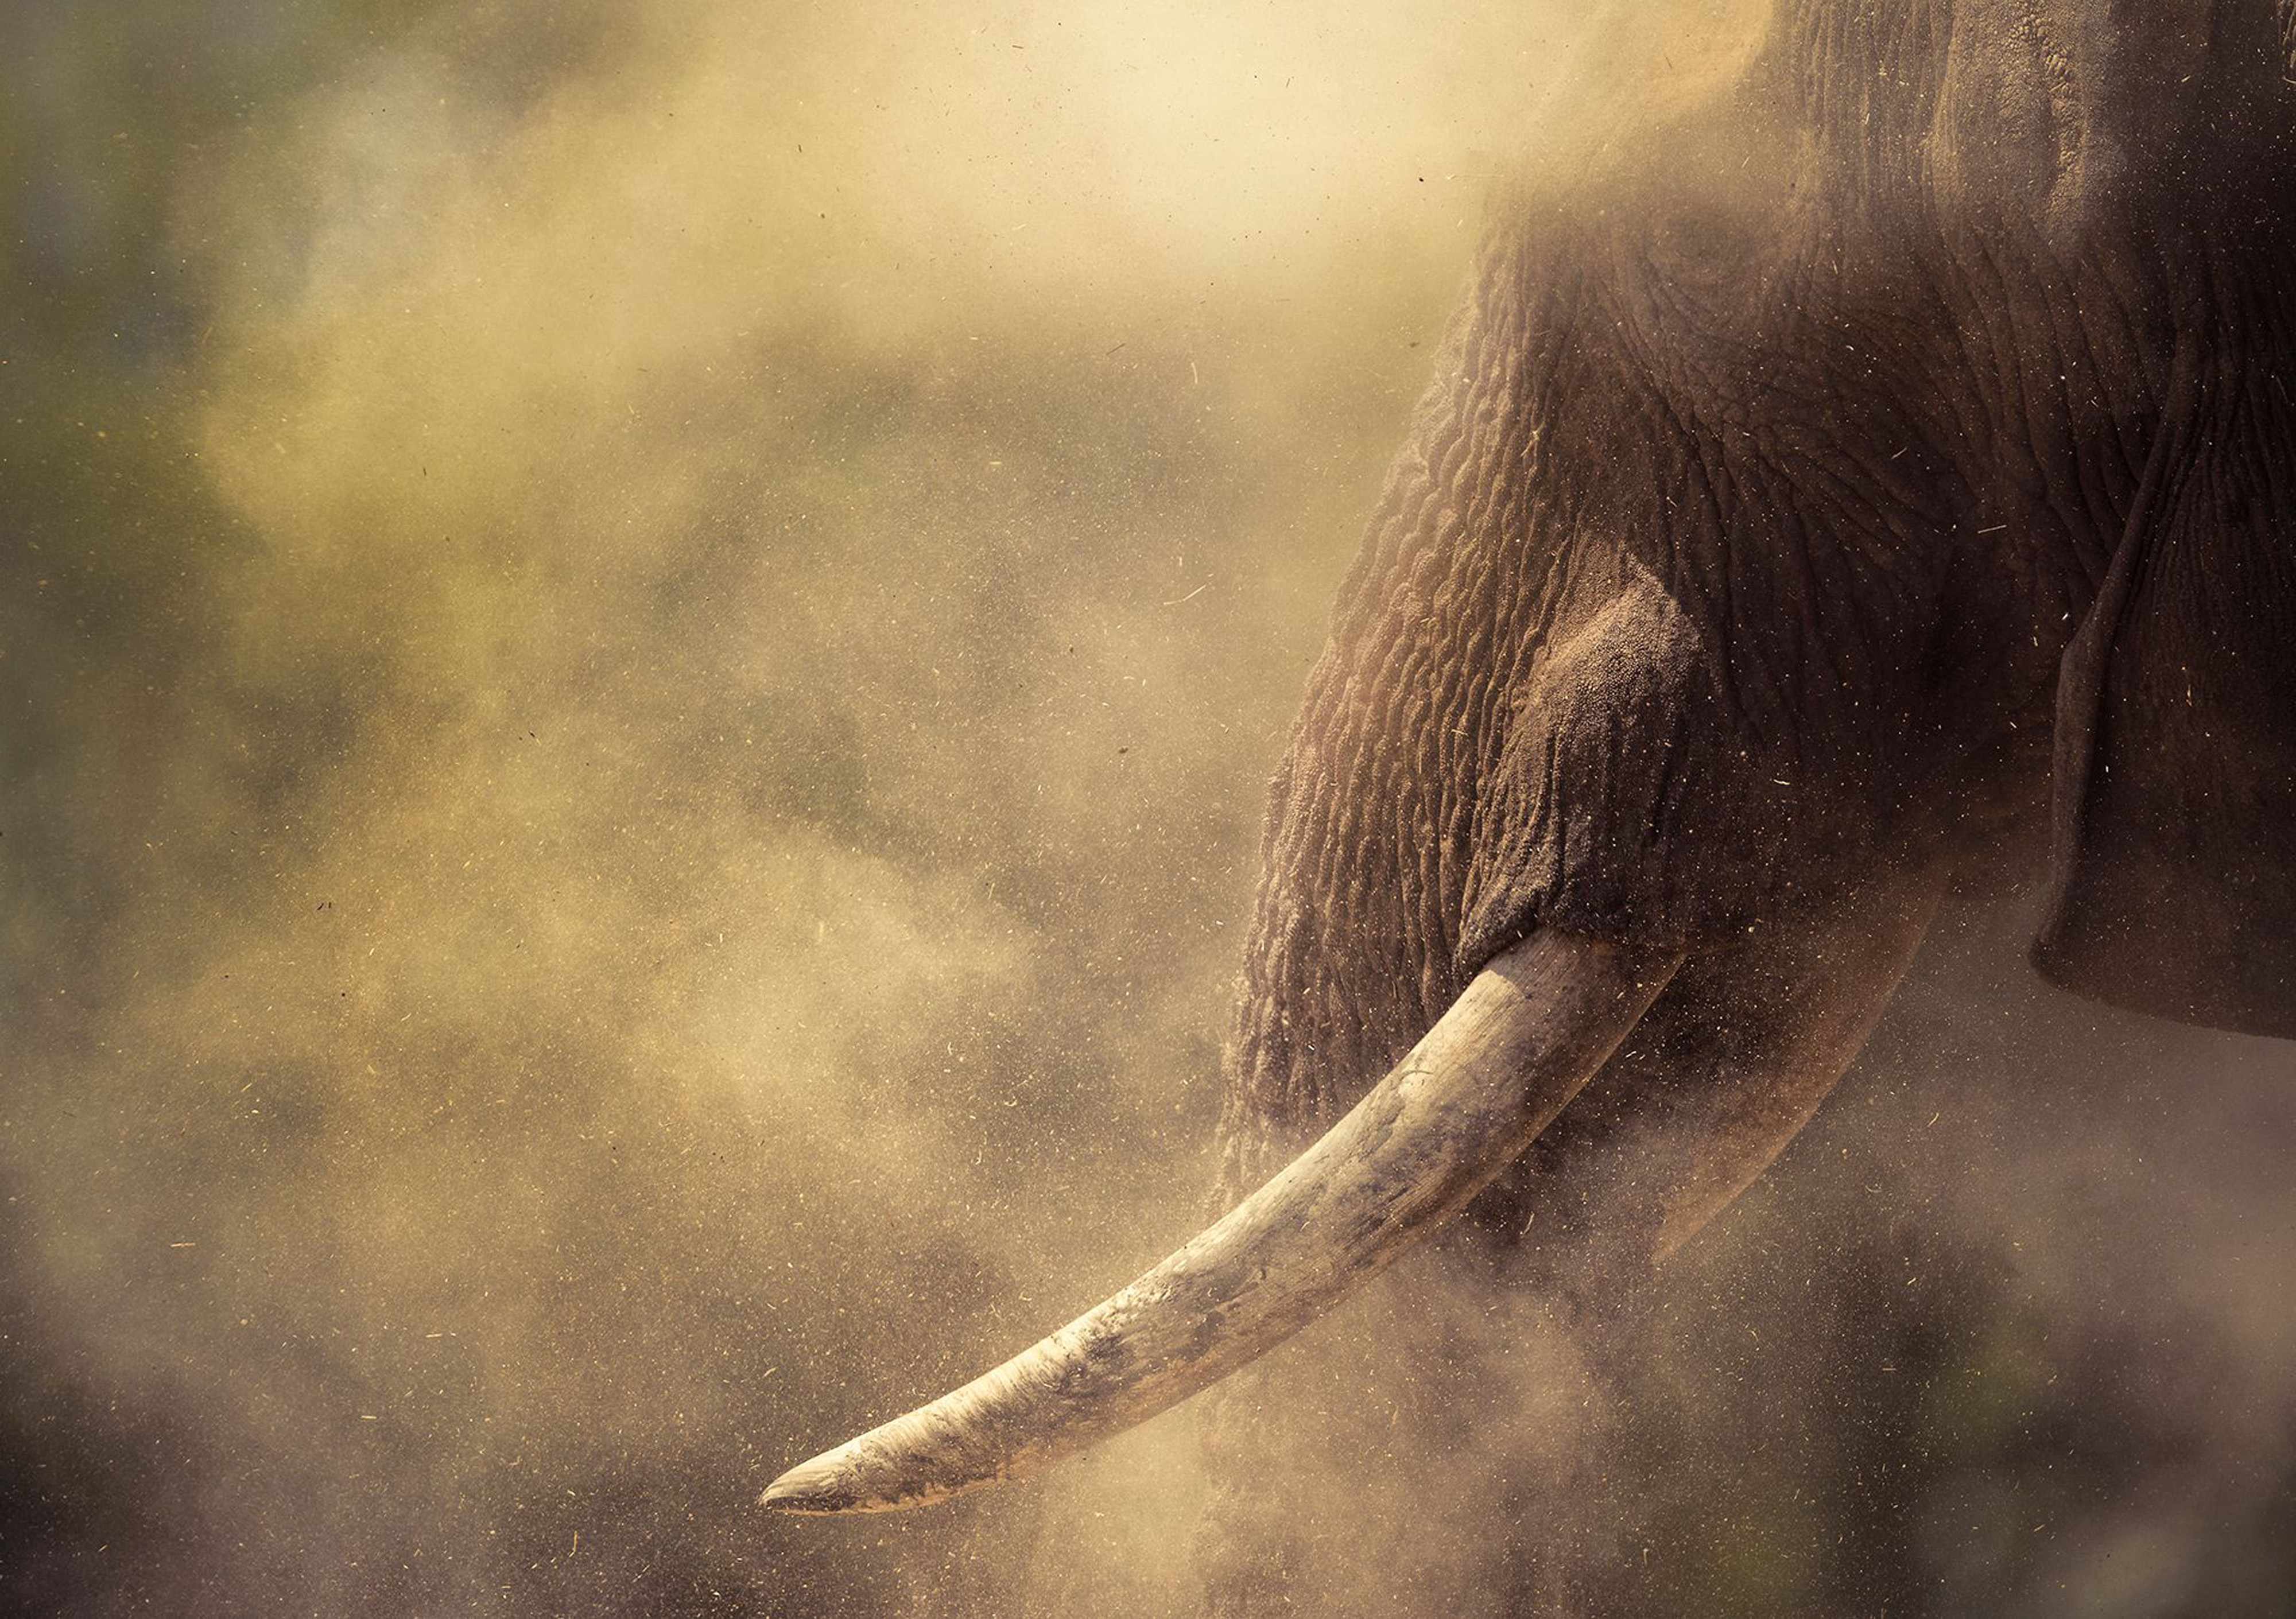 An elephant head, trunk and tusk is seen in profile amid a dust cloud that glows a soft yellow-brown.